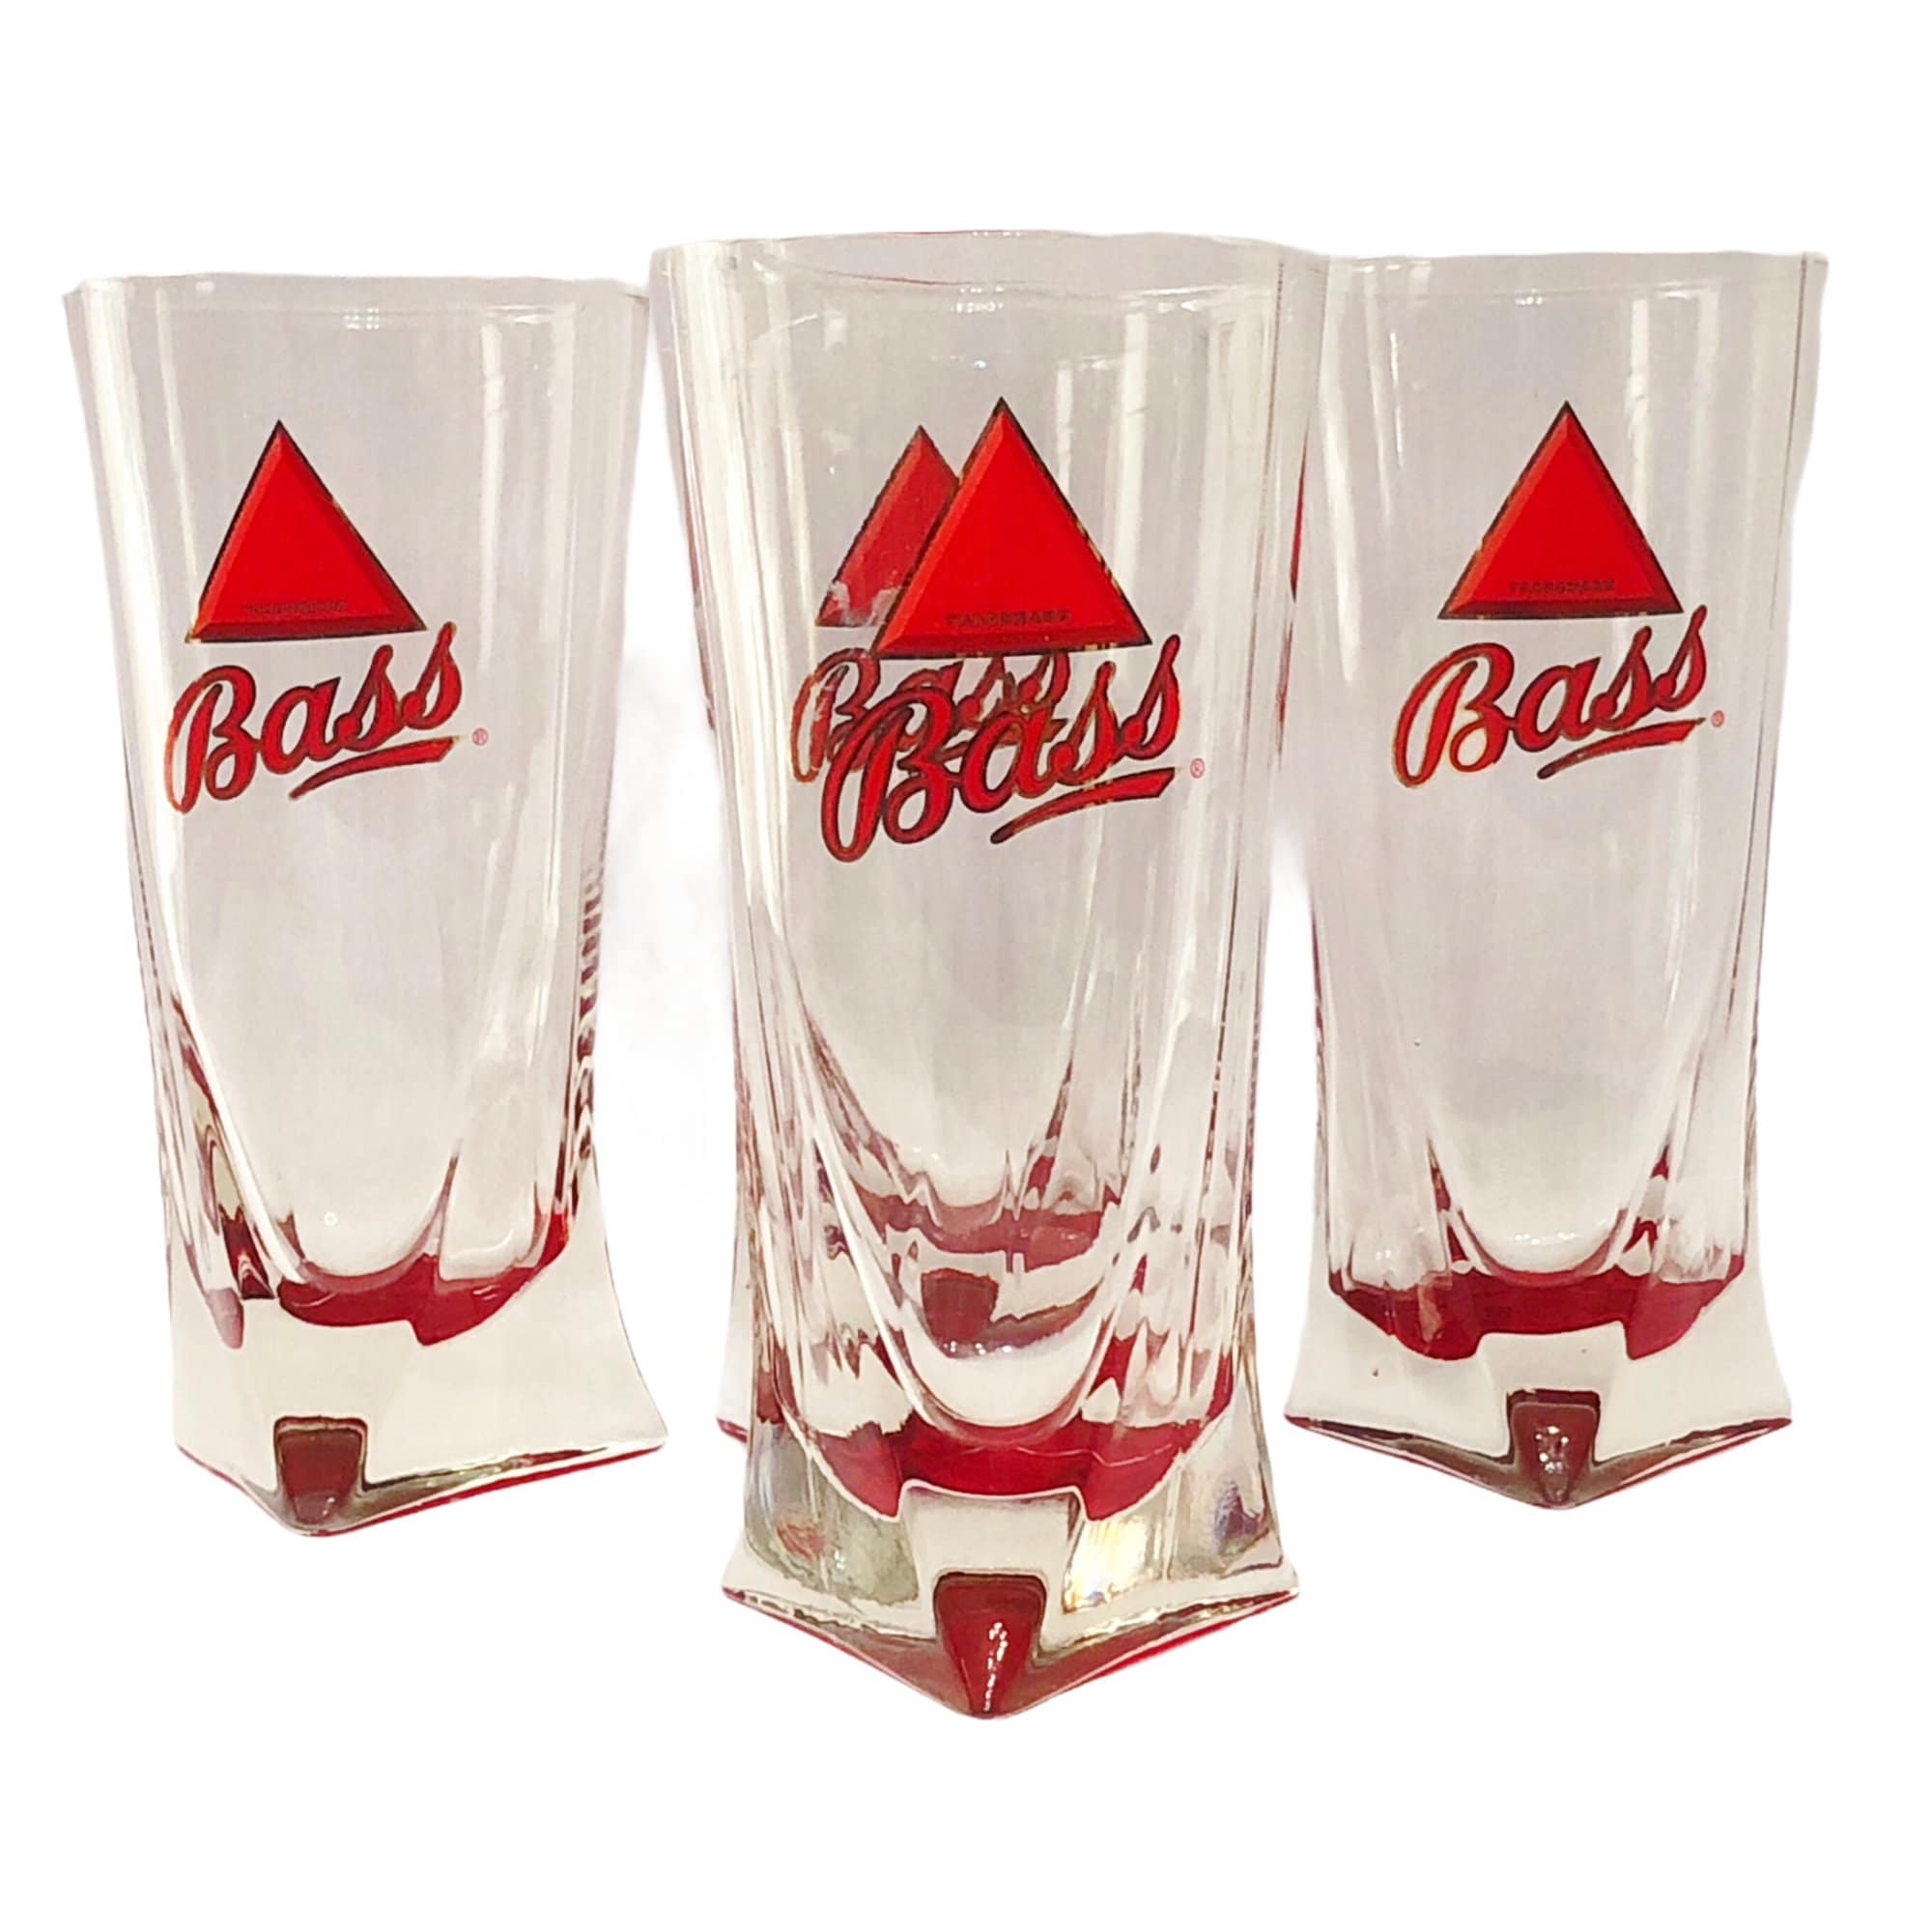 TWO BASS ALE TALL RED TRIANGLE BOTTOM PILSNER BEER GLASSES BRAND NEW & BEAUTIFUL 